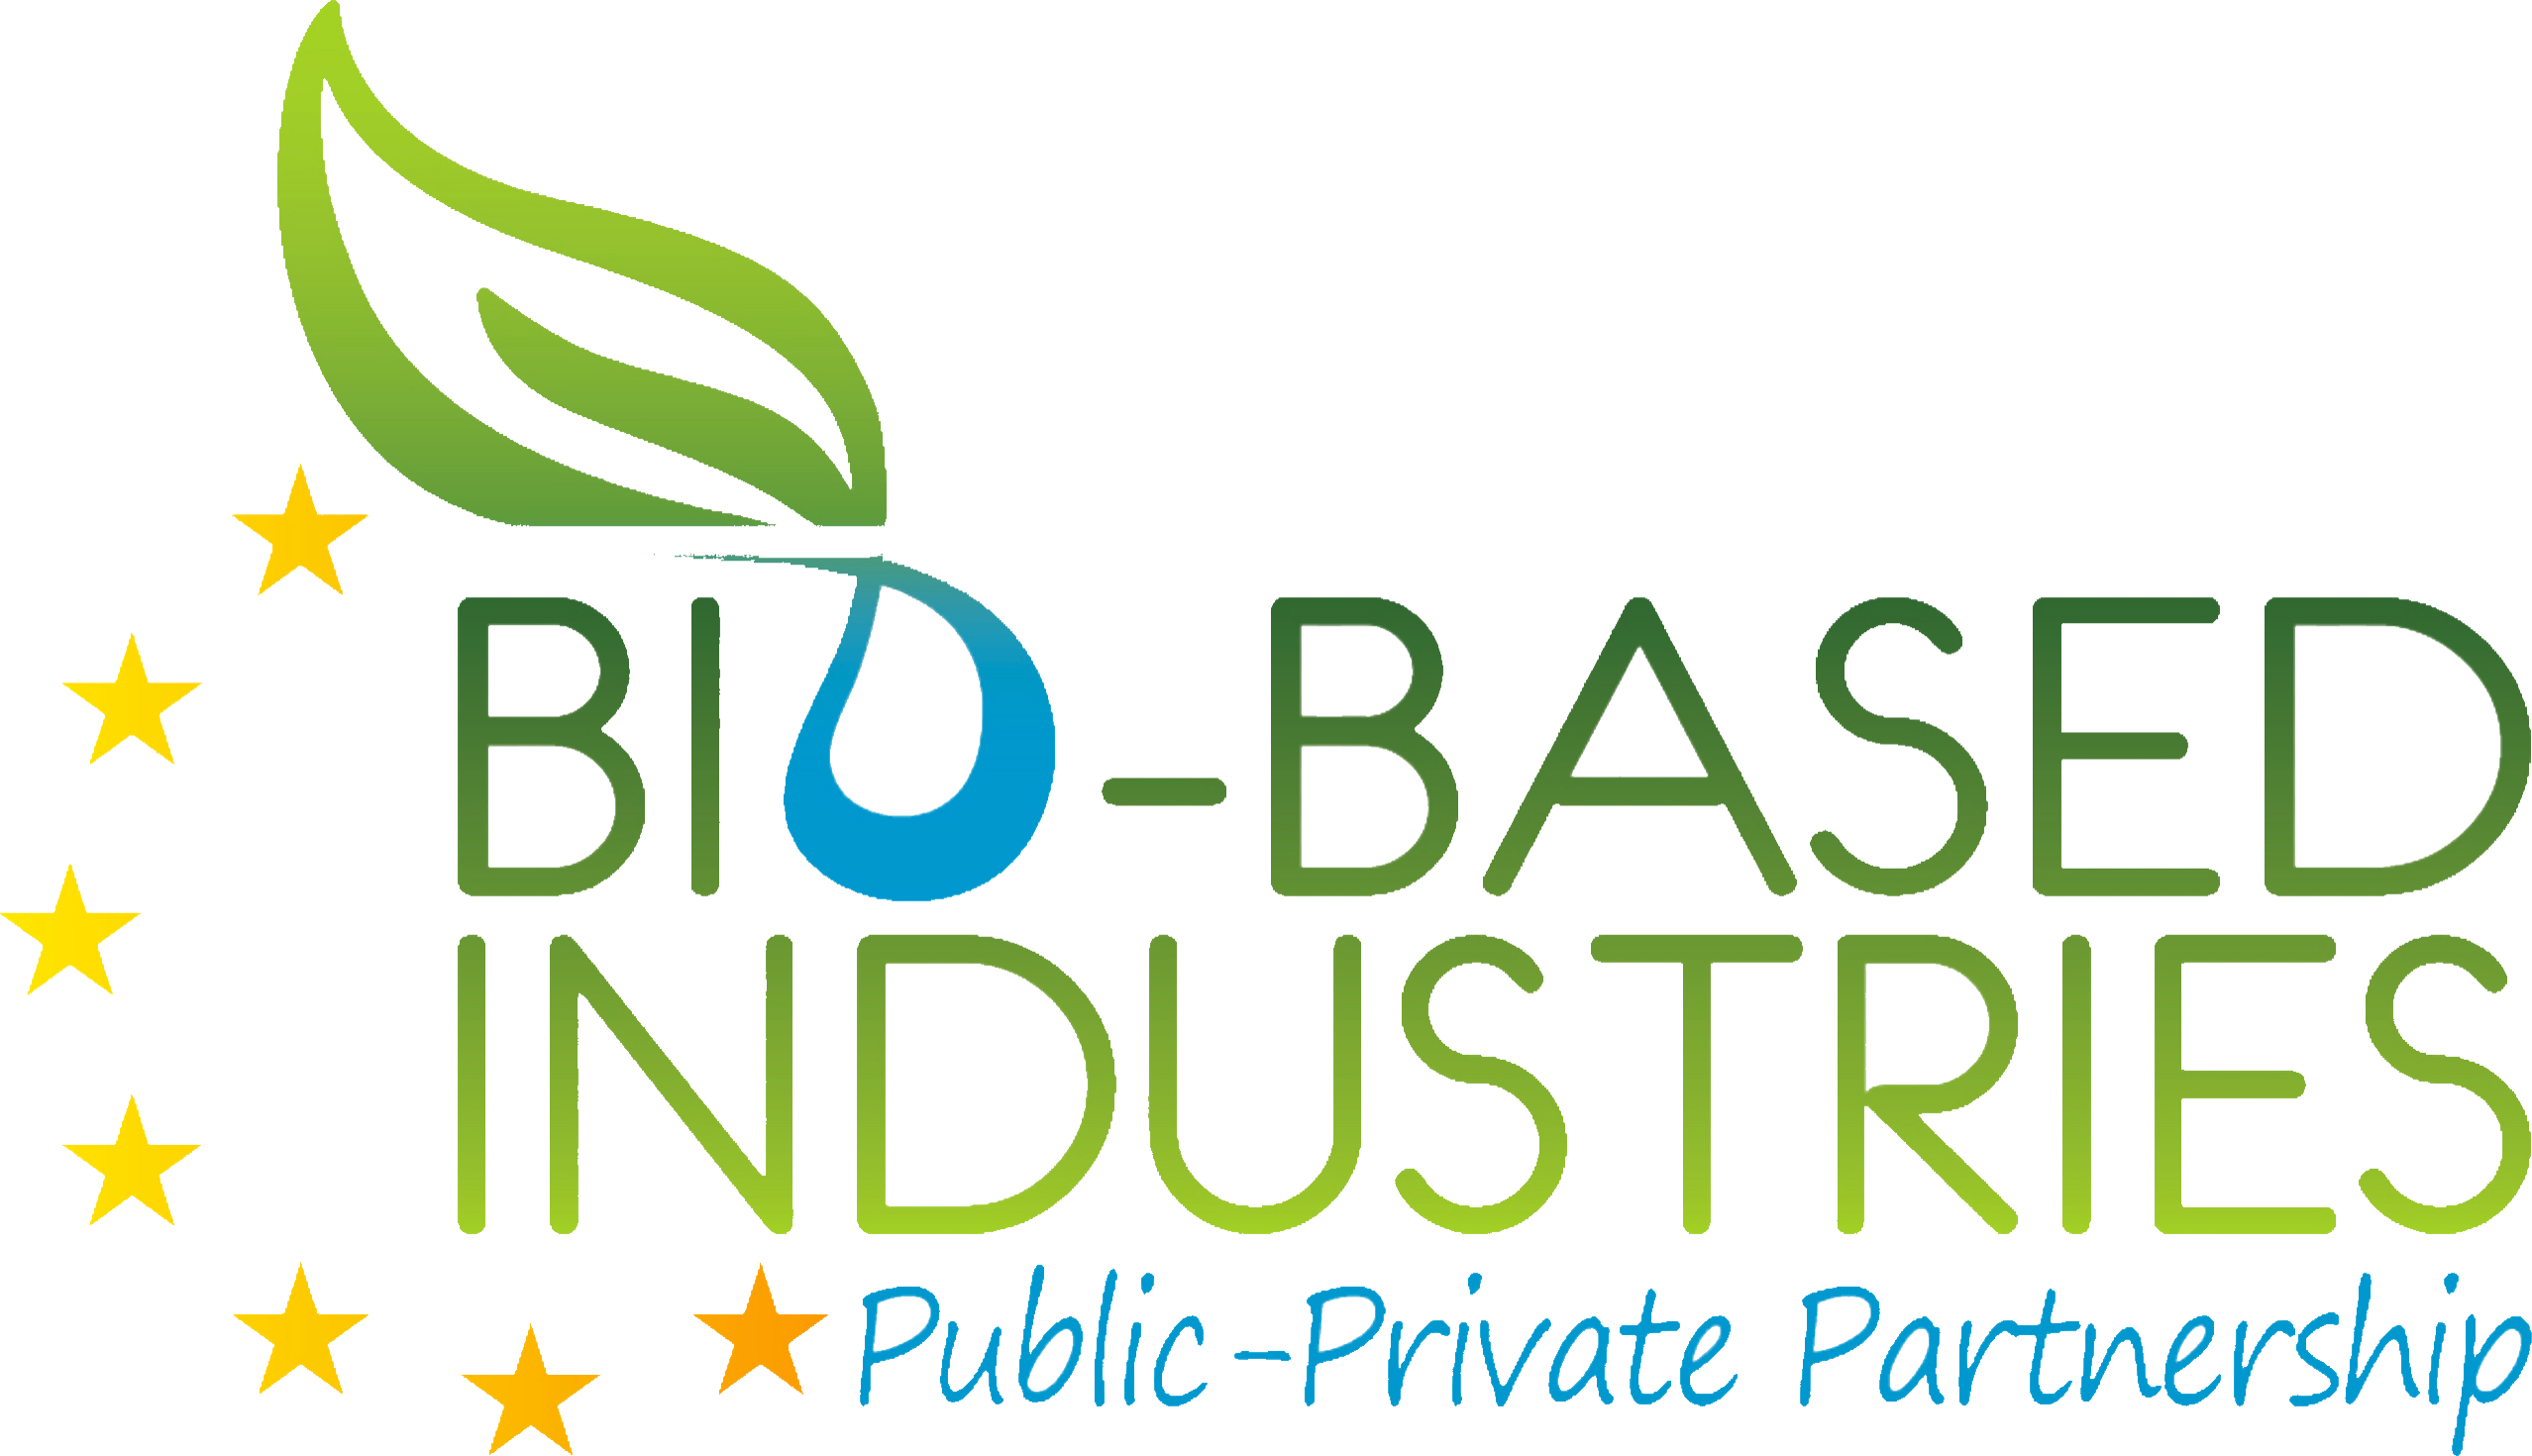 Arbiom led consortium receives €10.9M funding from the Bio-Based Industries Joint Undertaking (BBI-JU) to demonstrate the production of sustainable feed for aquaculture from forestry material